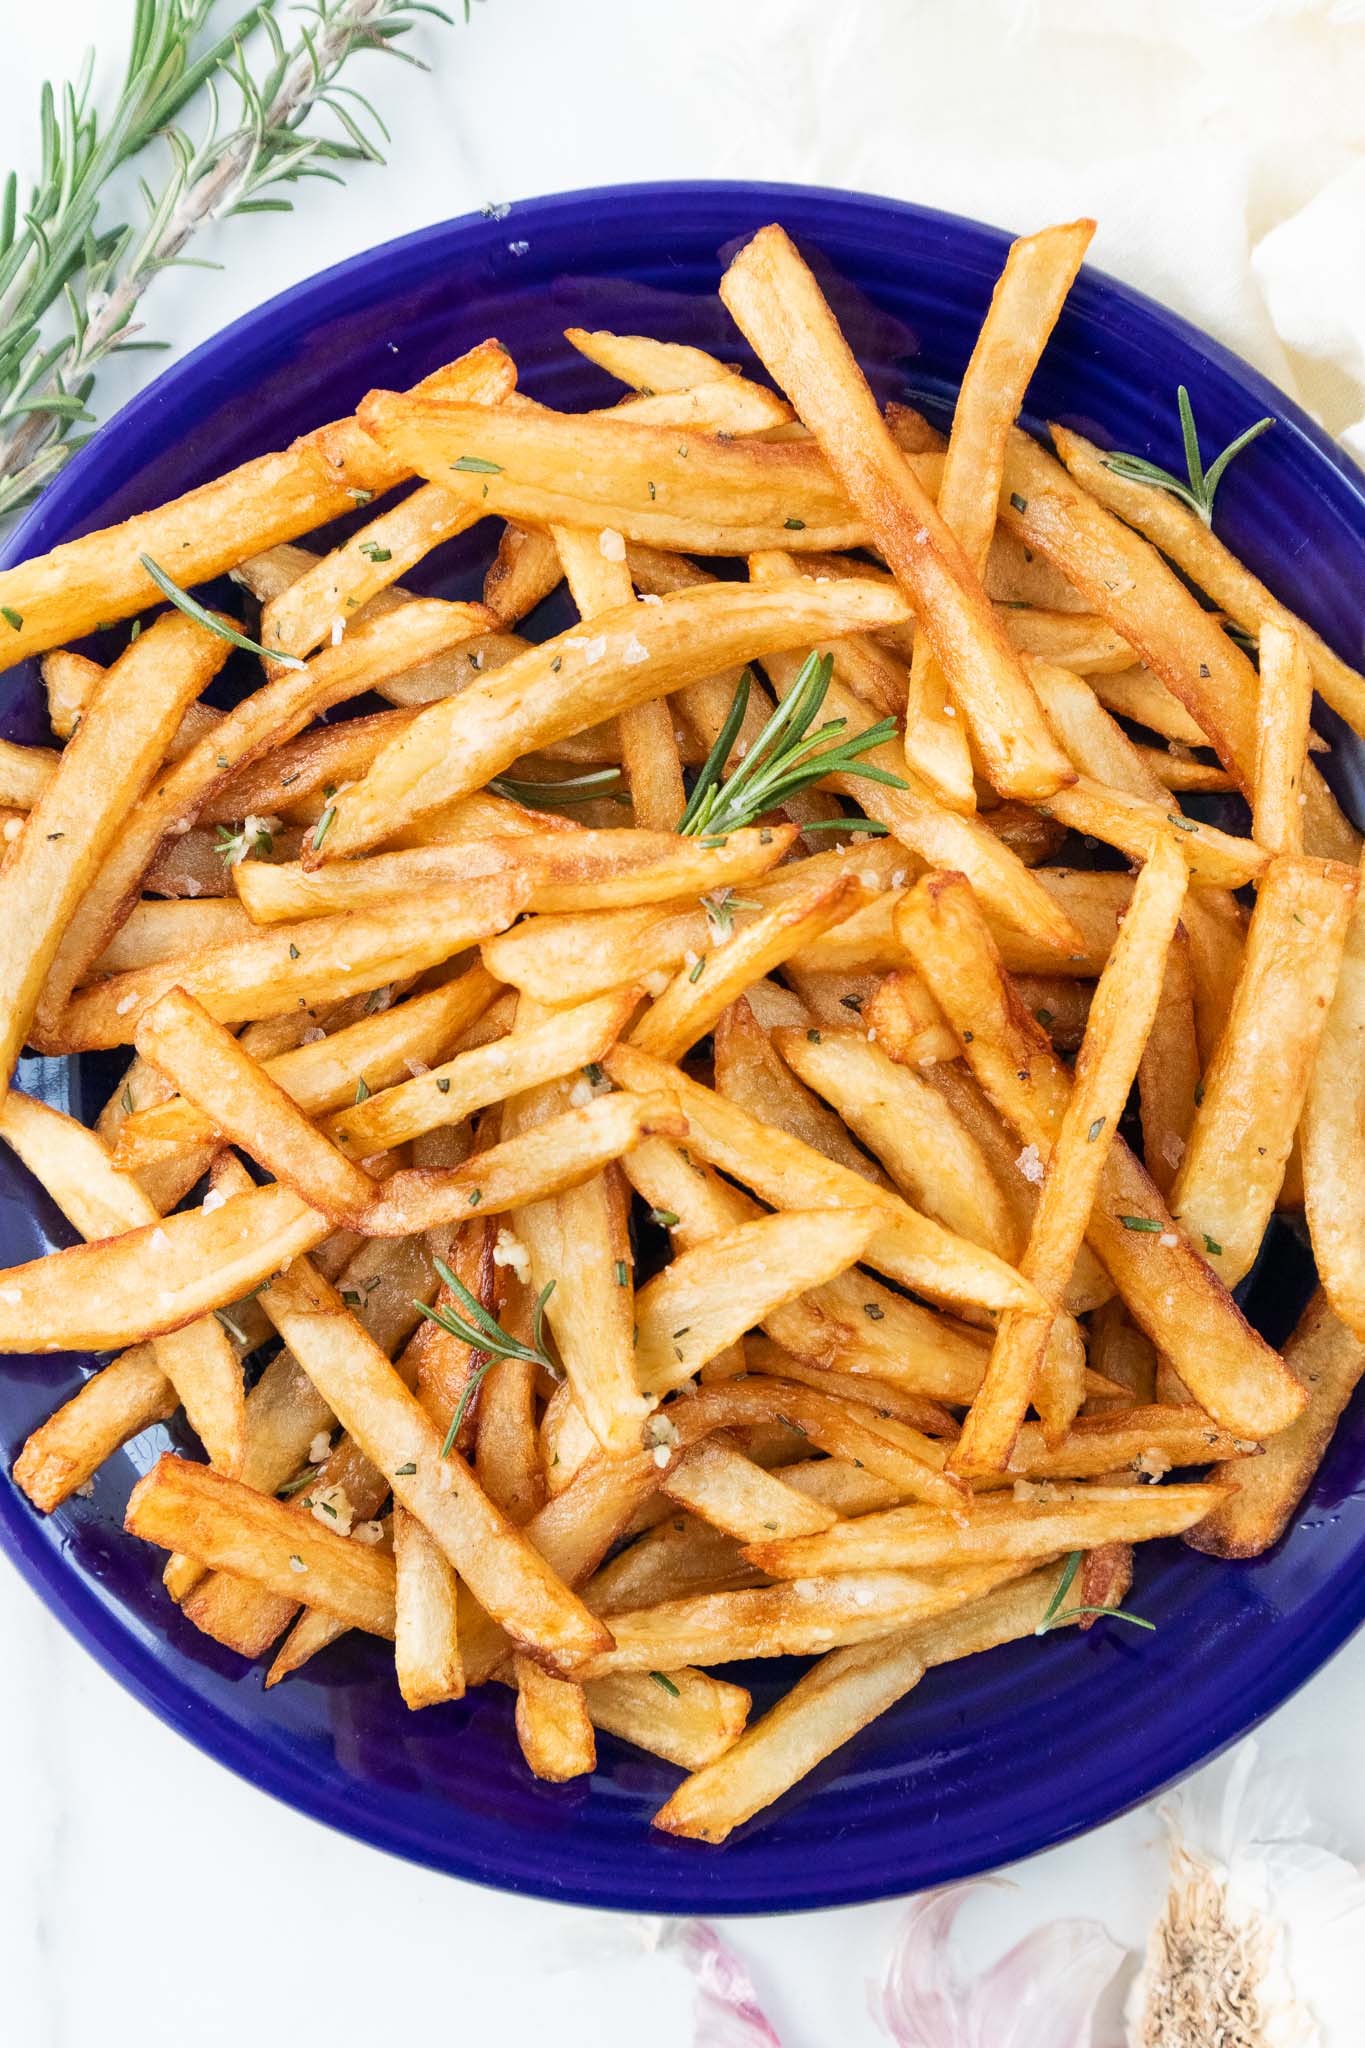 Rosemary Garlic Fries - BEYOND THE NOMS